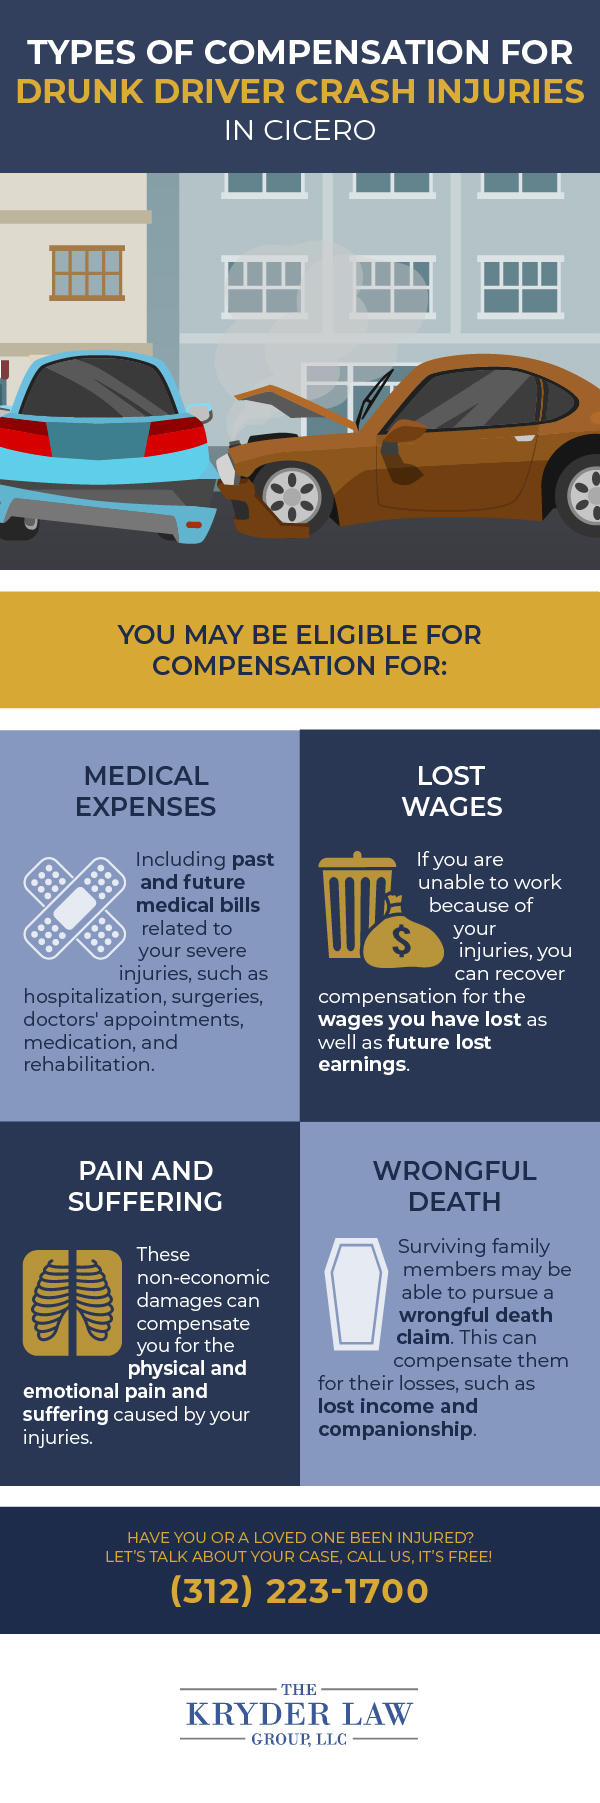 Types of Compensation for Drunk Driver Crash Injuries in Cicero Infographic